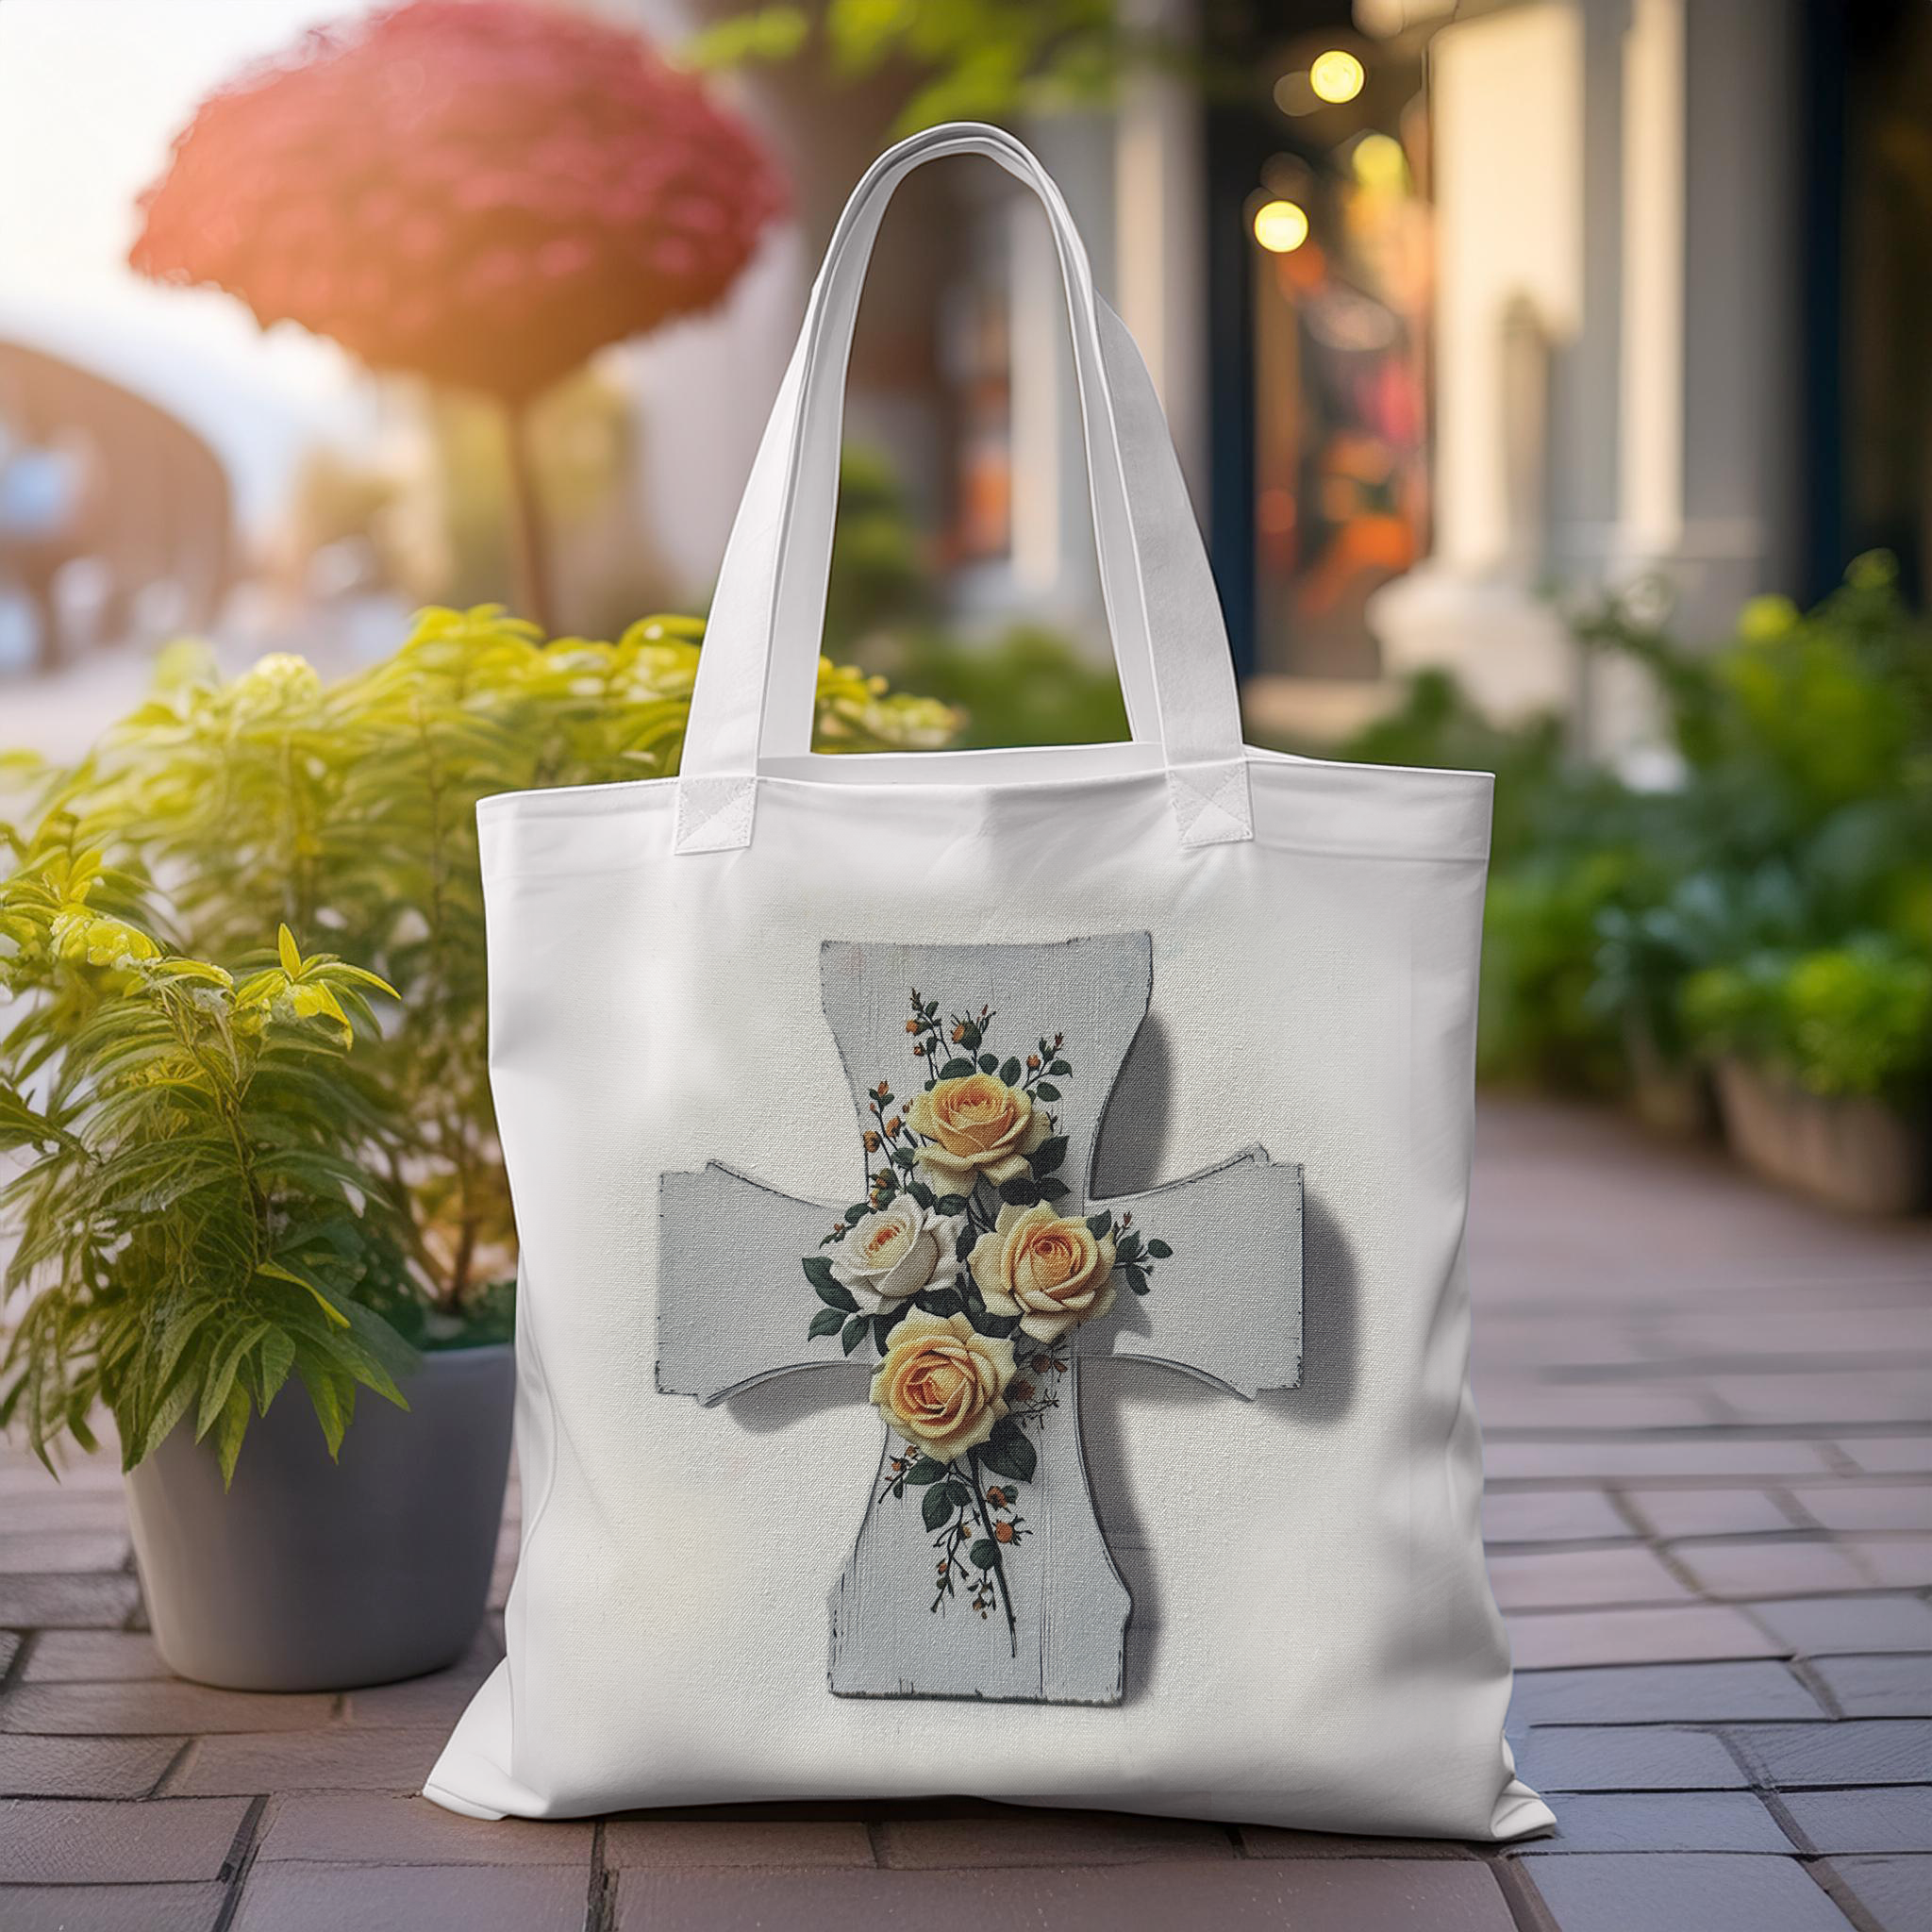 Tote Bag, 13"x 15", Holy Cross with Yellow Roses Designed by Carol Landry